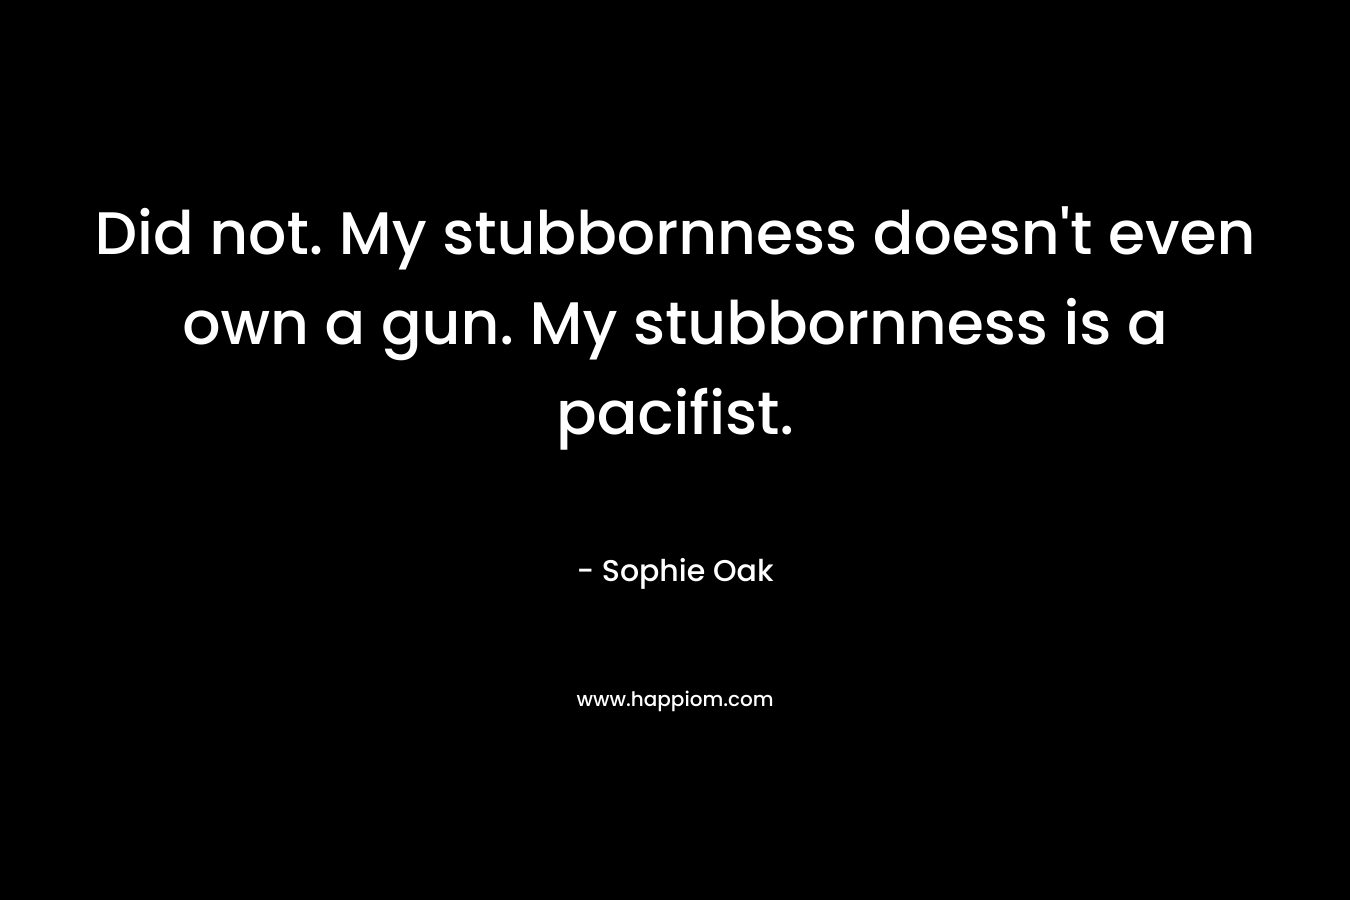 Did not. My stubbornness doesn’t even own a gun. My stubbornness is a pacifist. – Sophie Oak